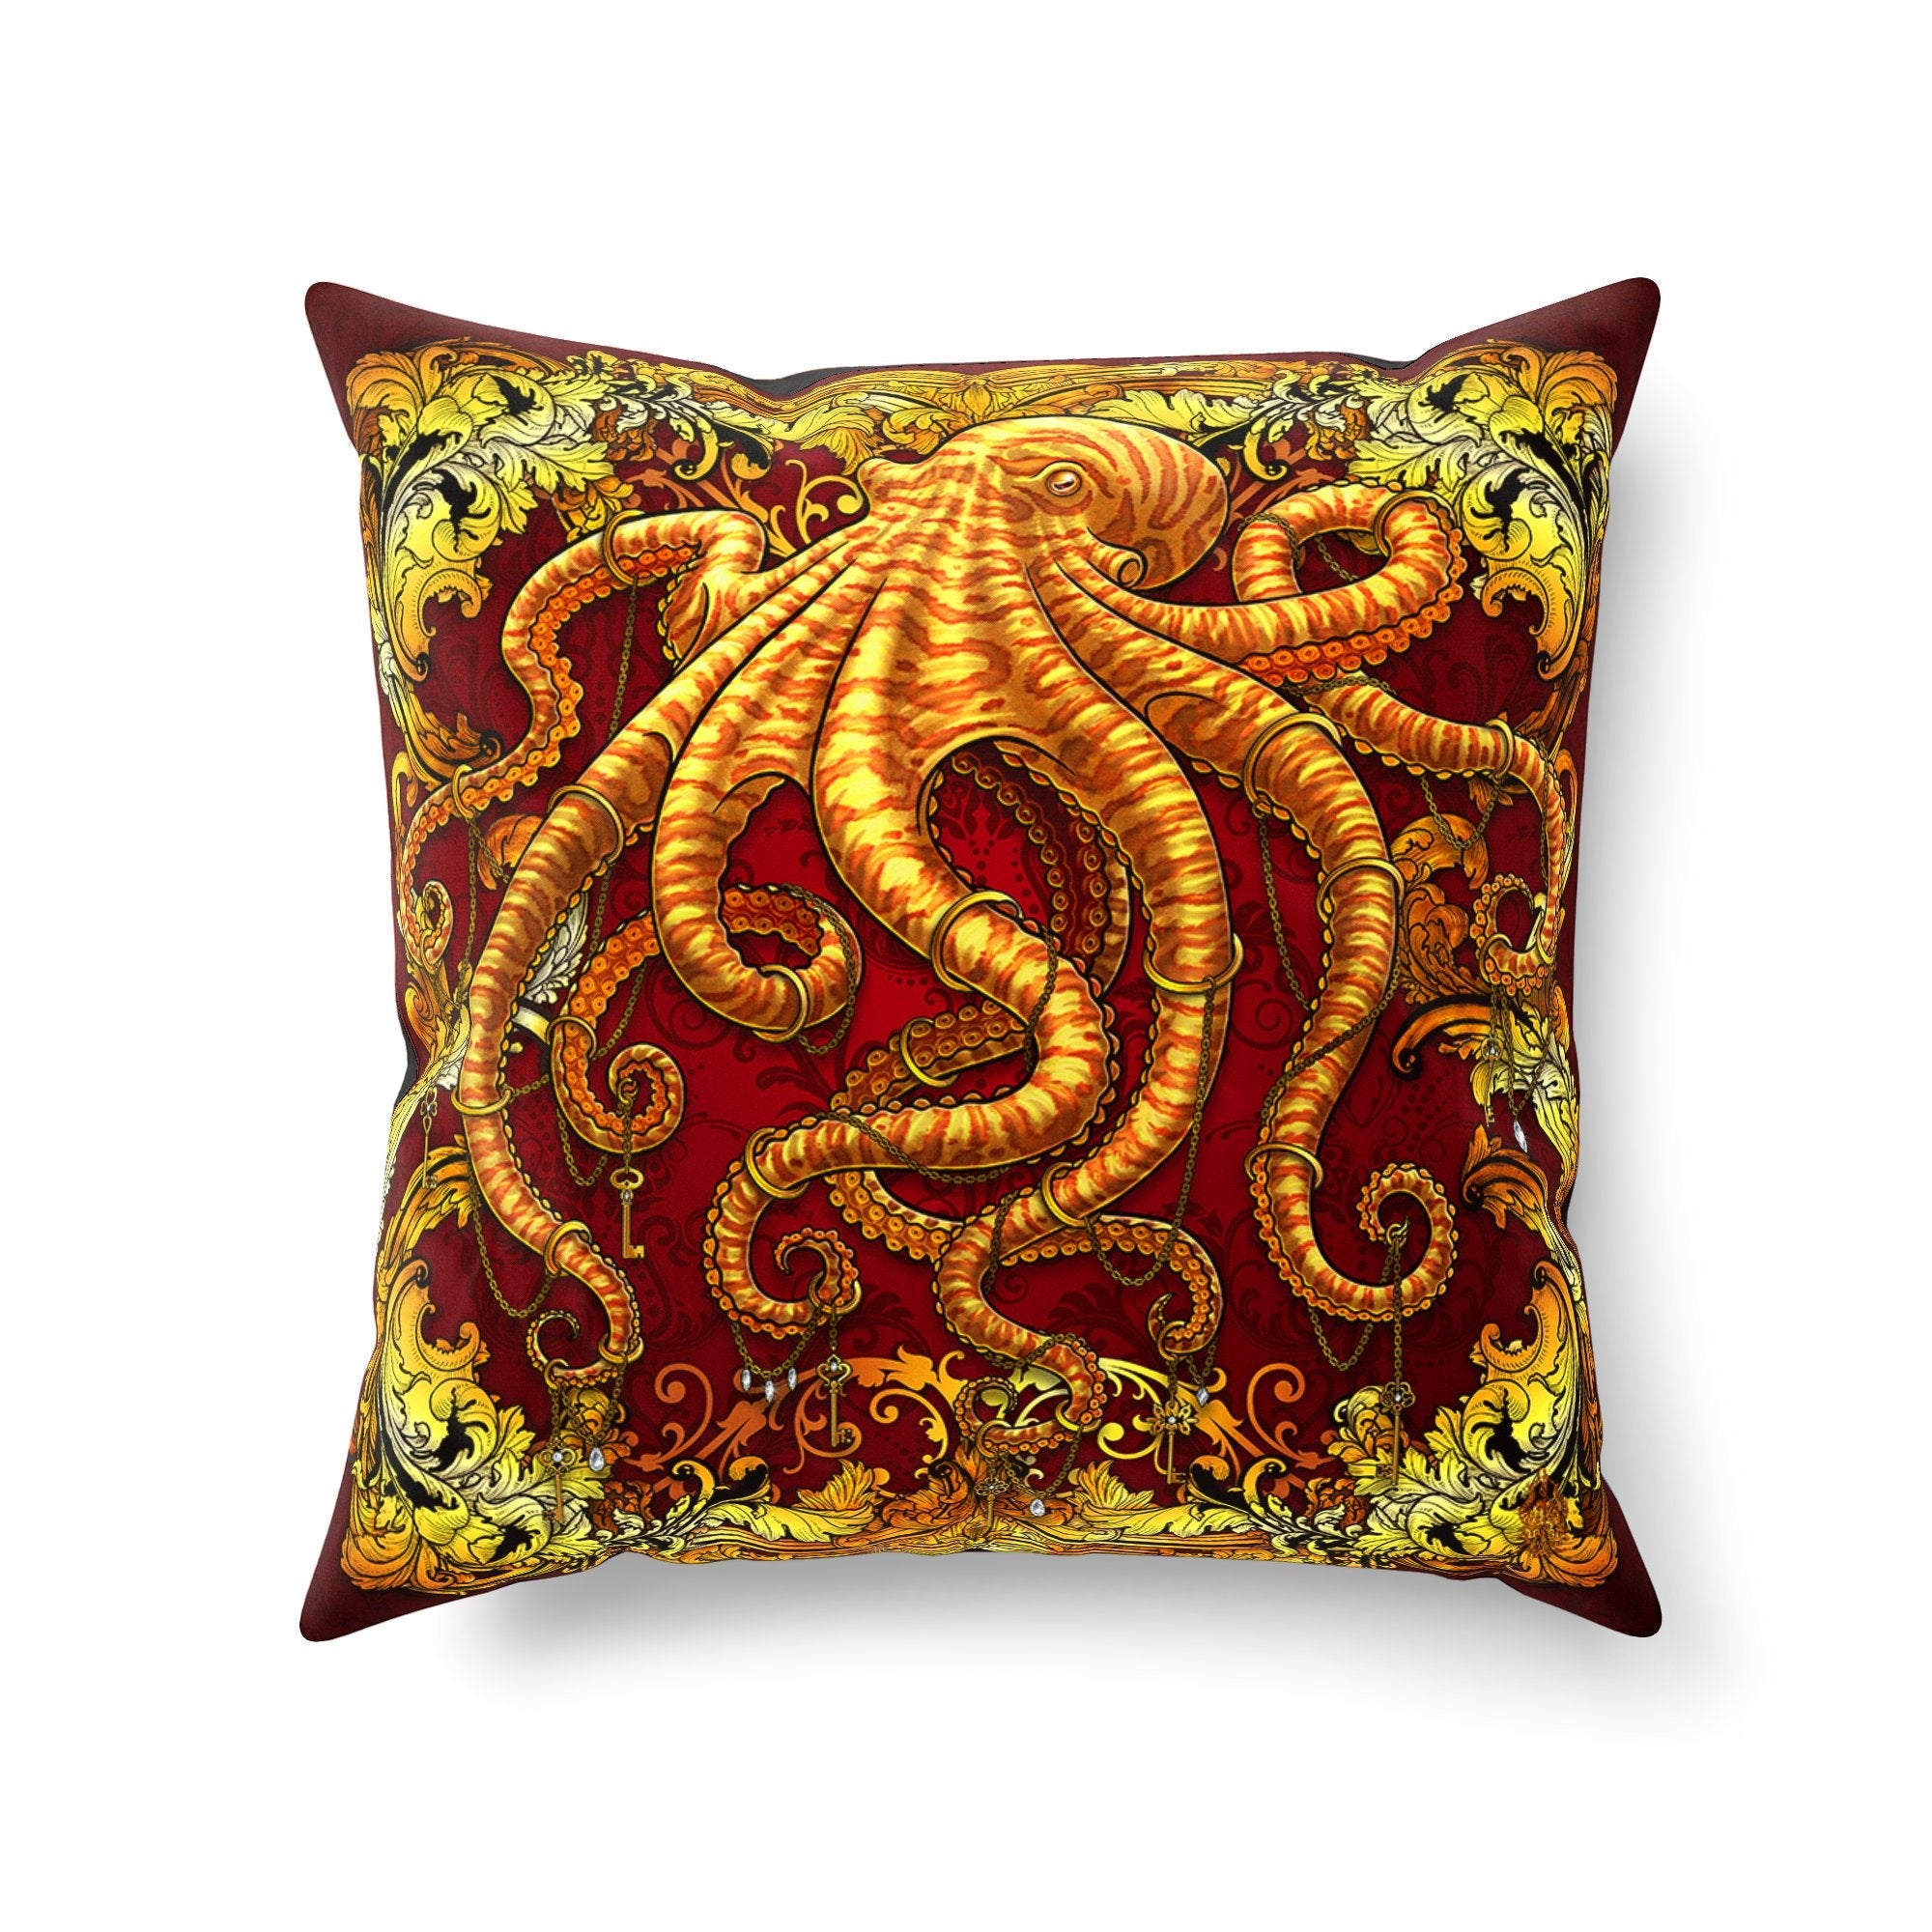 Octopus Throw Pillow, Decorative Accent Cushion, Beach Room Decor, Indie and Eclectic Design, Alternative Home - Gold & Red - Abysm Internal